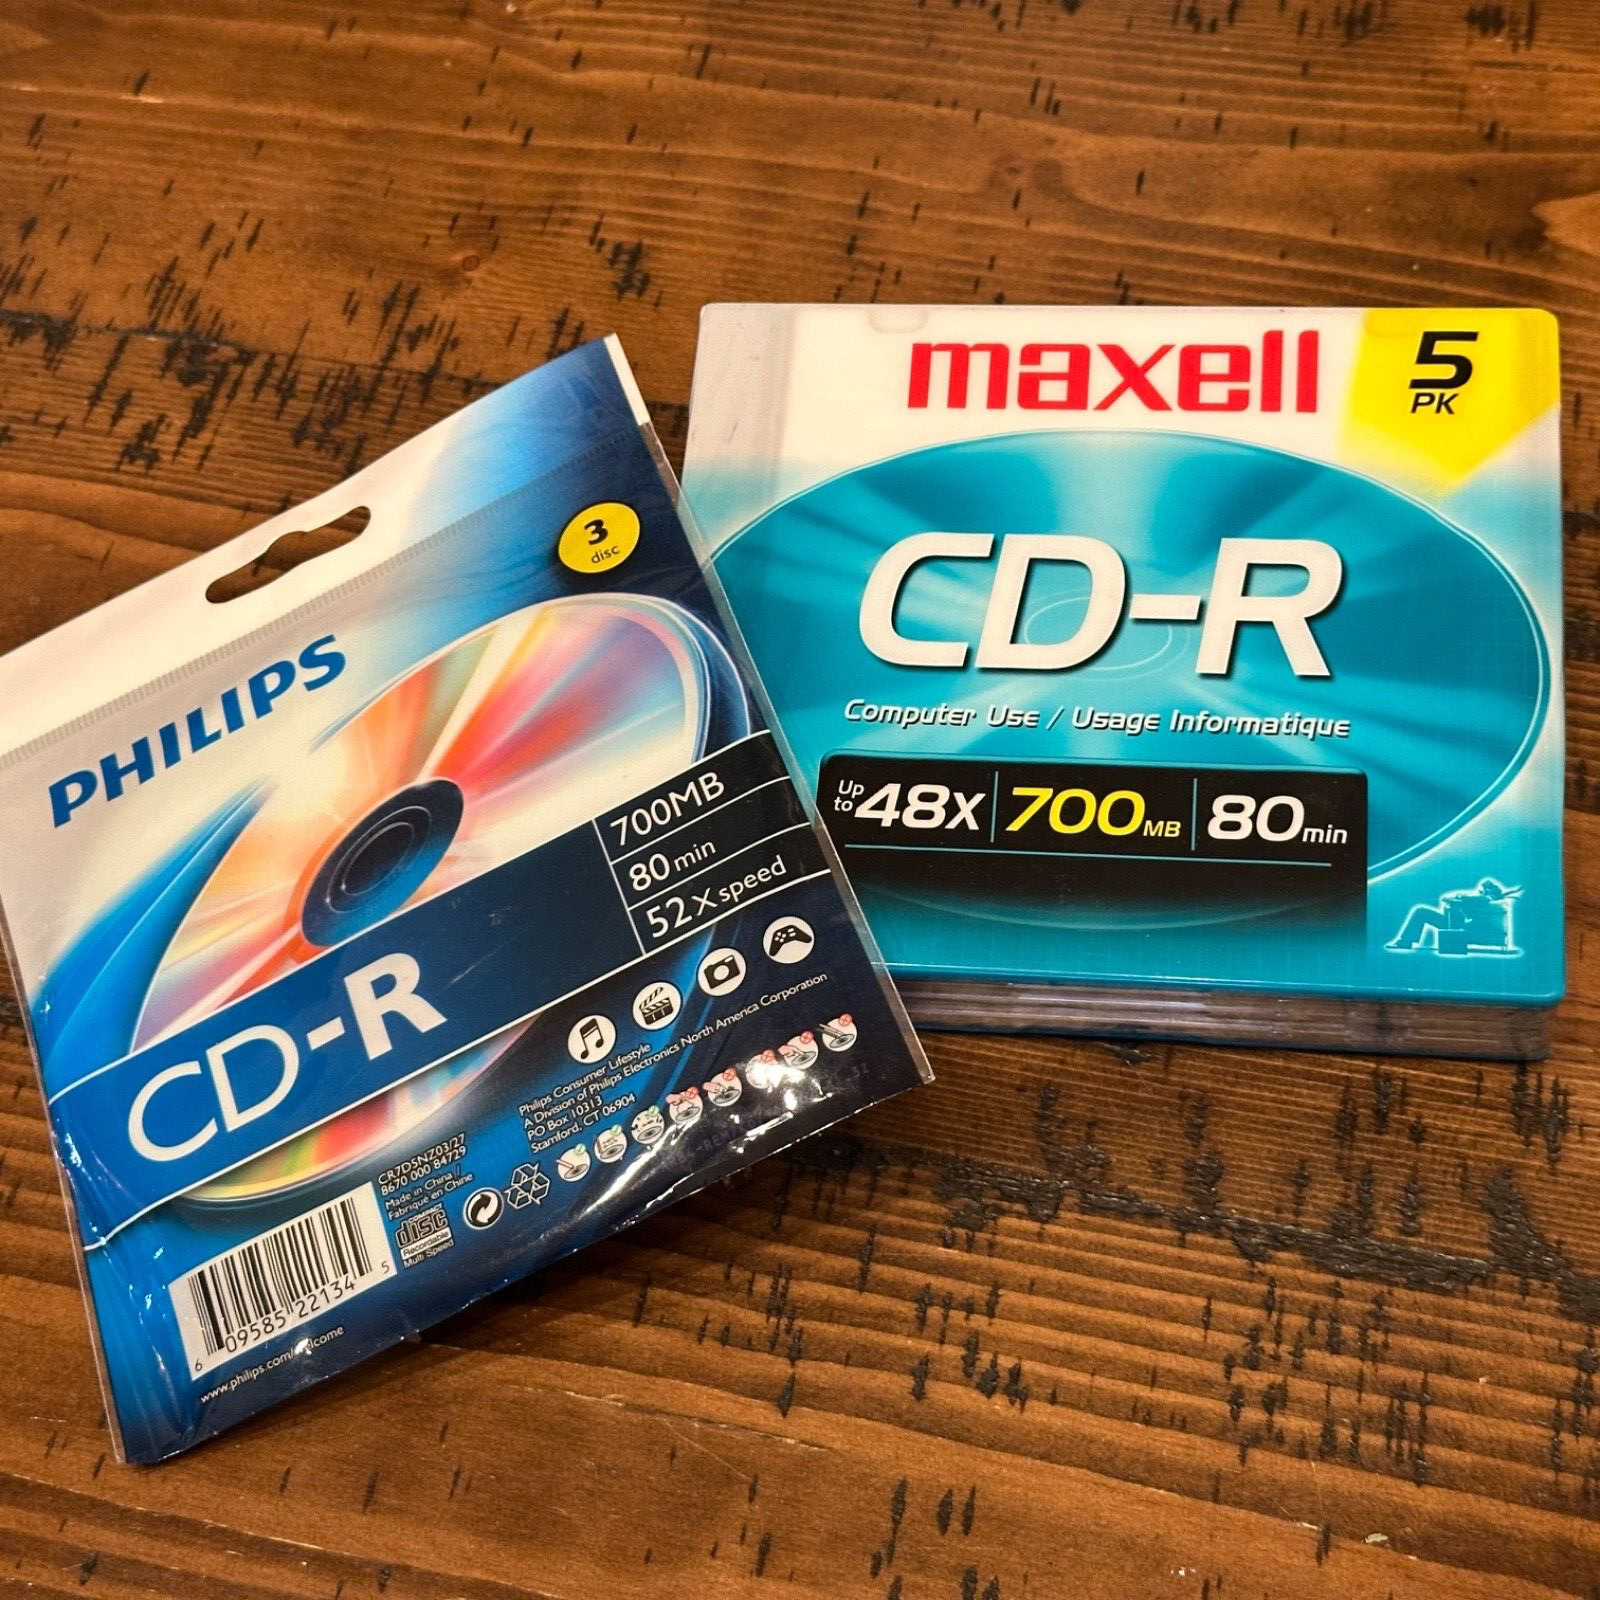 Lot of 8 MAXELL & PHILIPS CD-R Recordable 80min 700mb CDR Blank Compact Discs